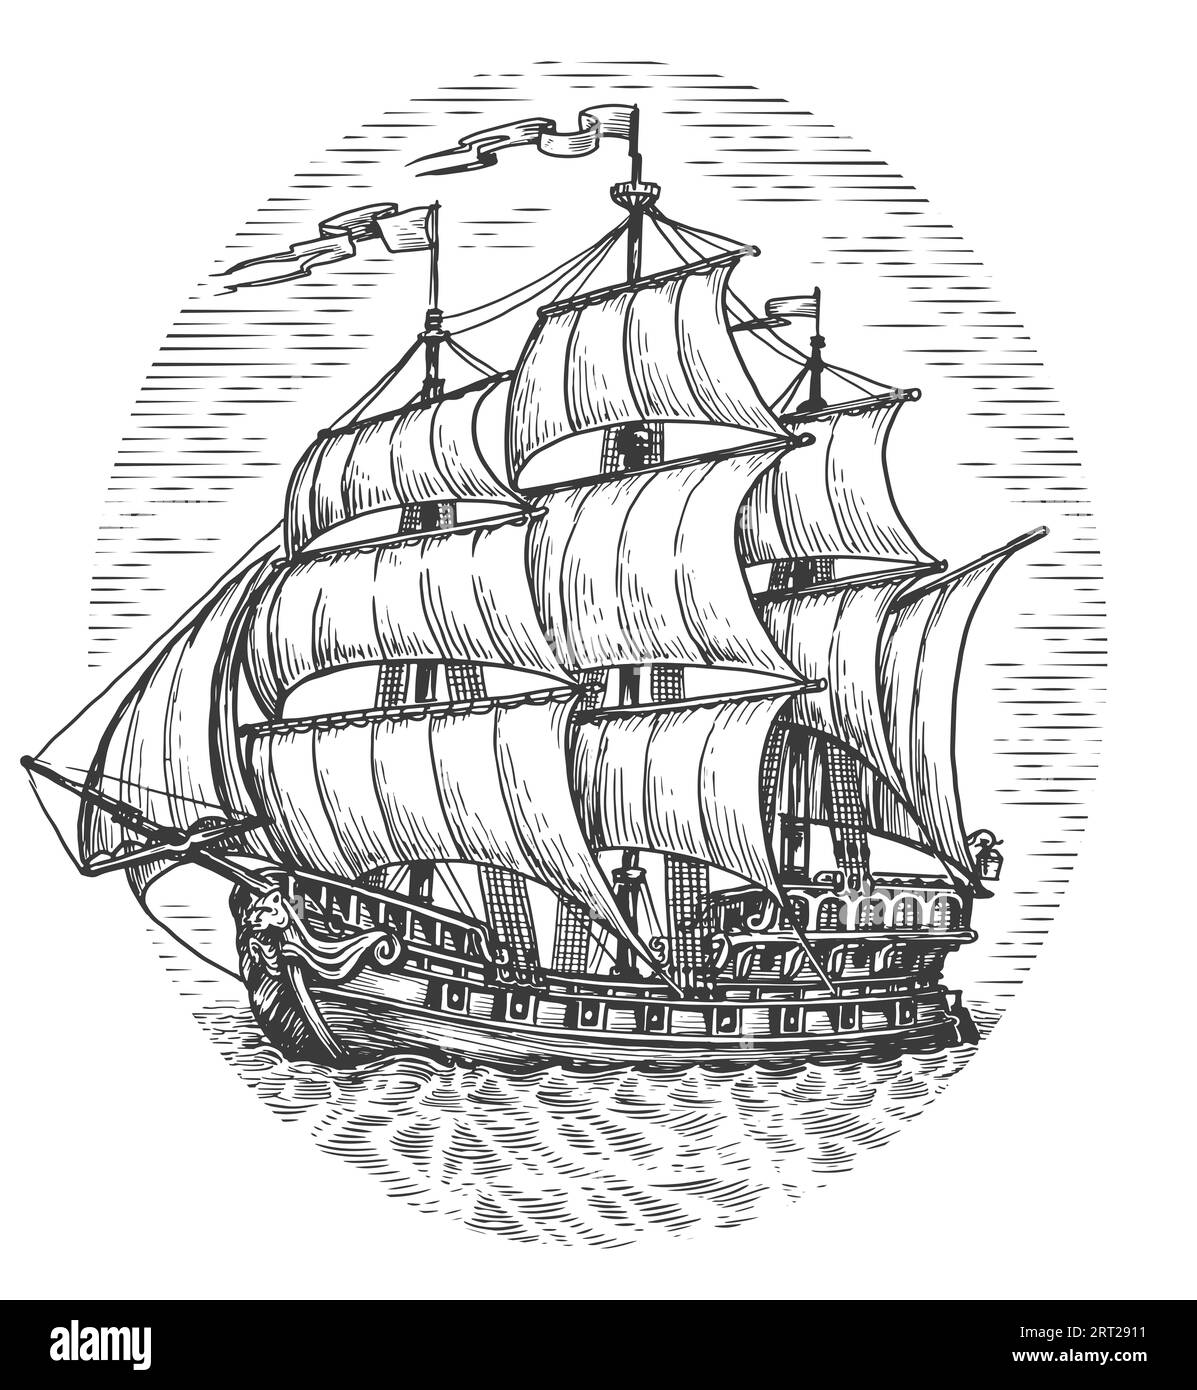 Ship with sails, illustration. Vintage sailboat at sea, sketch in engraving style Stock Photo